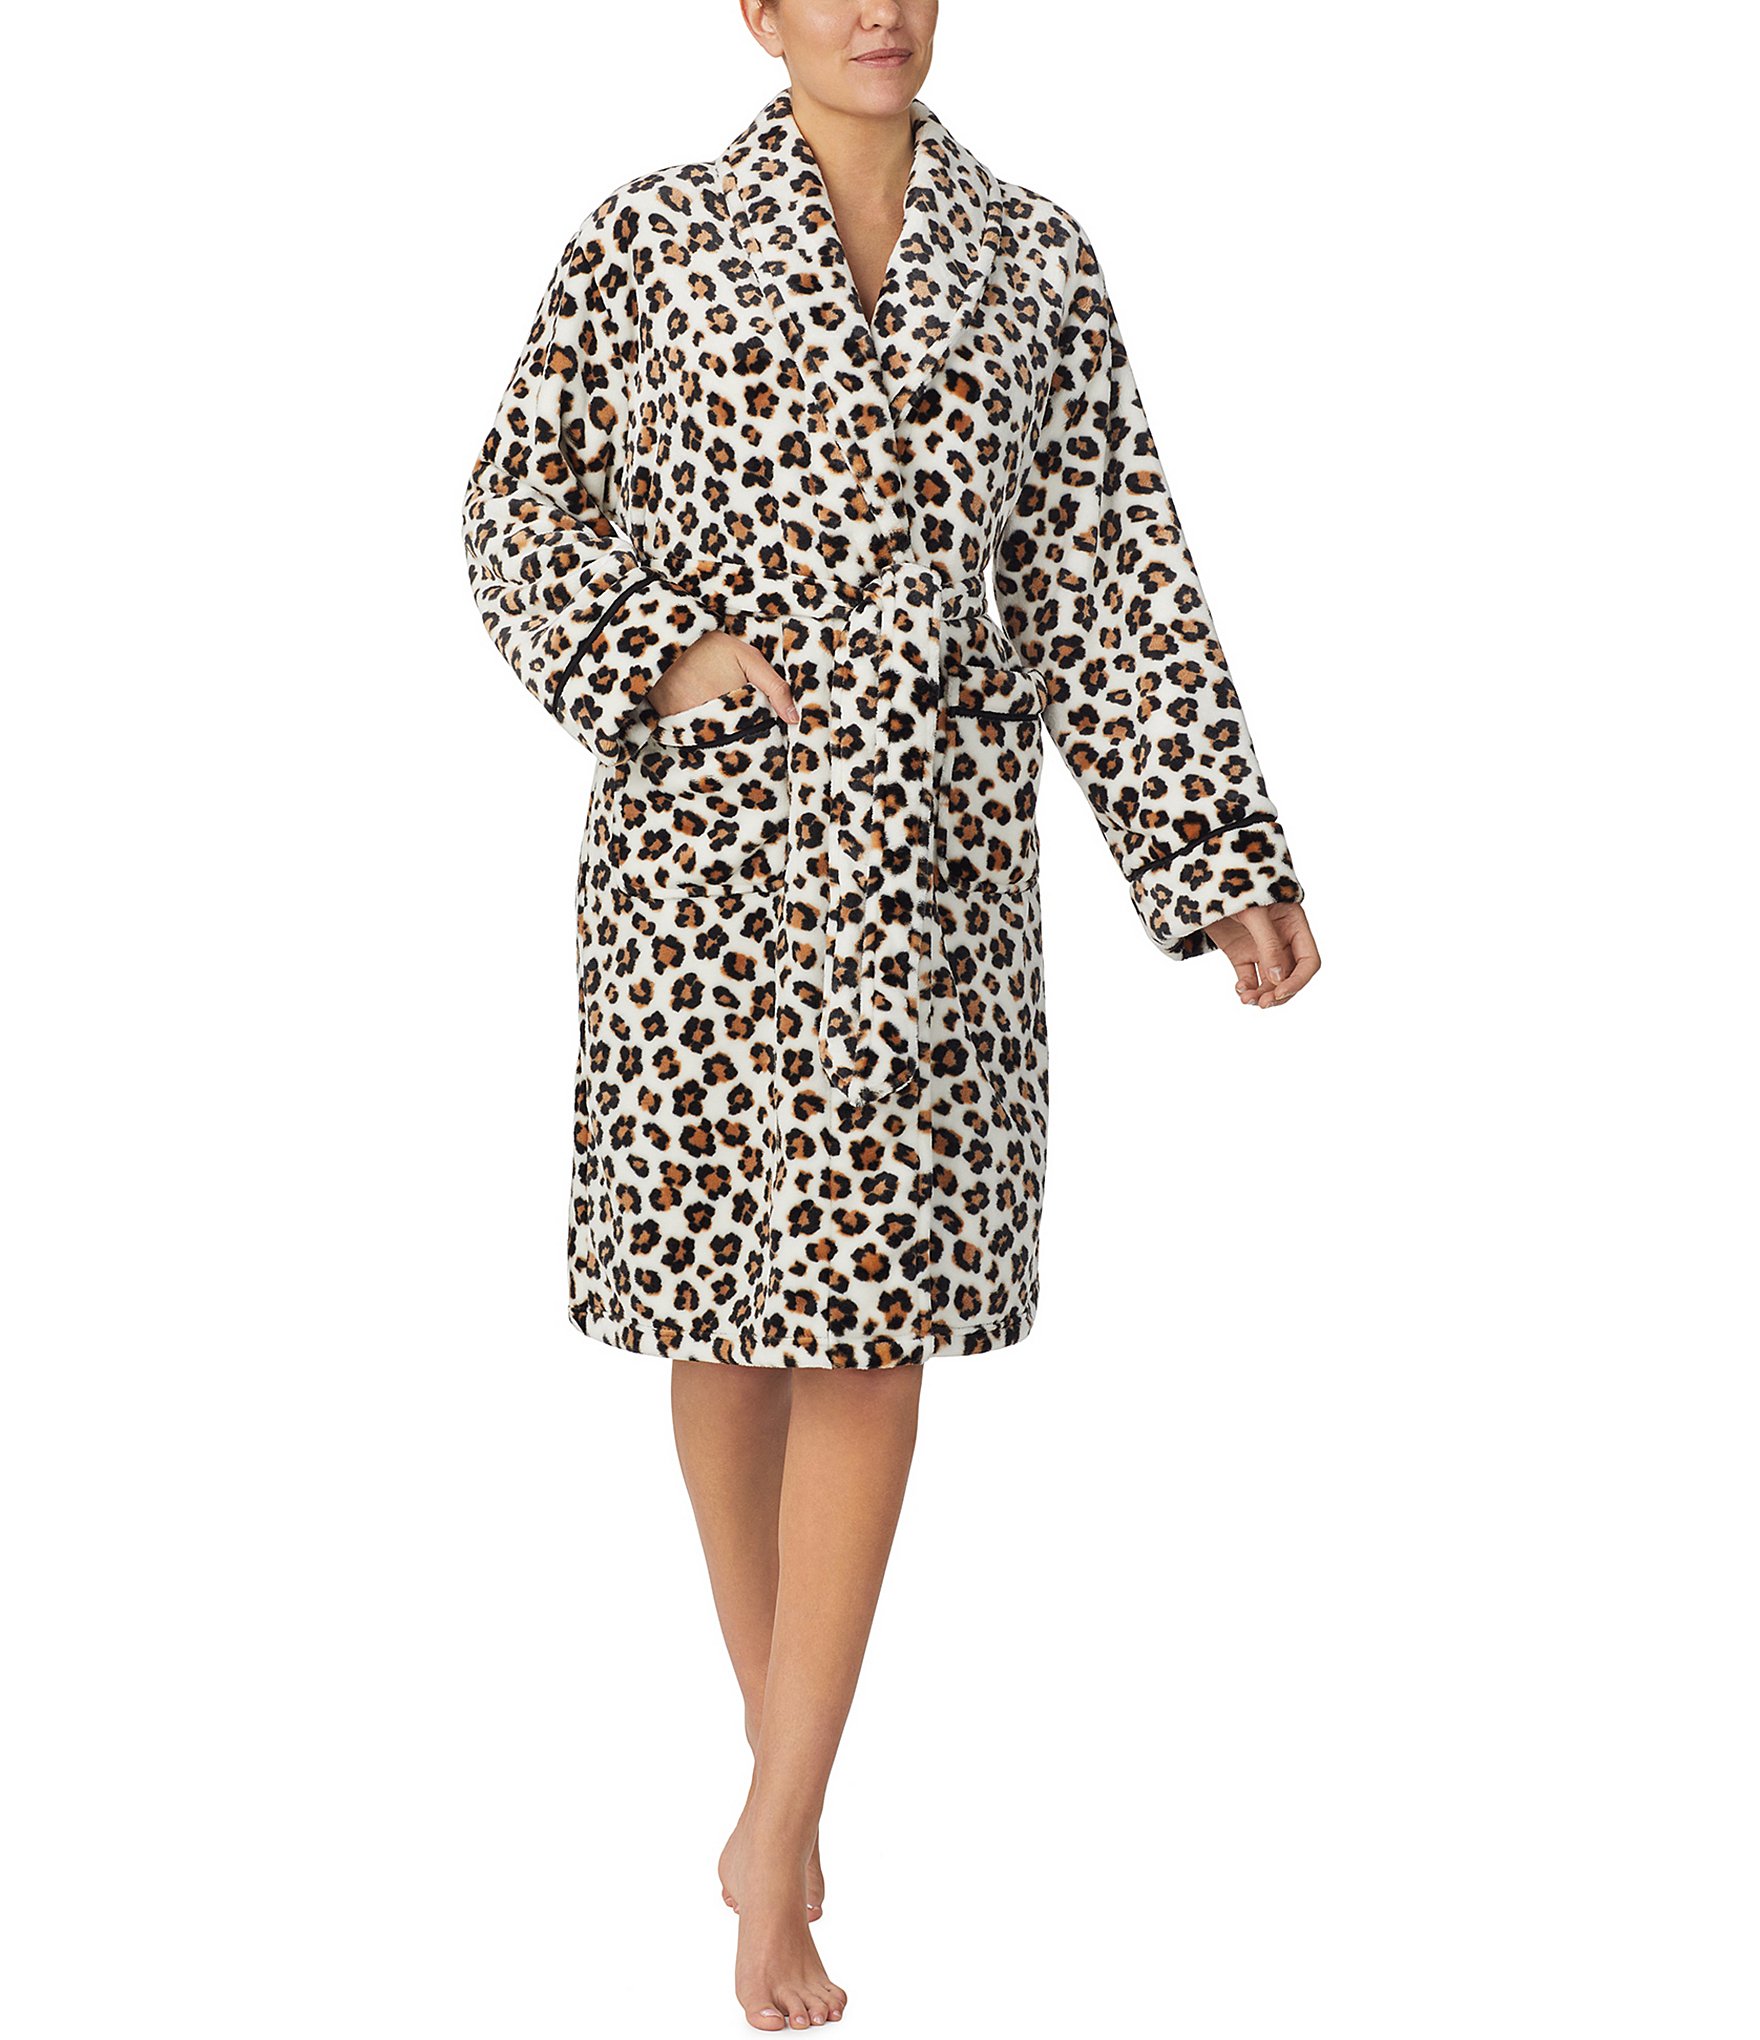 Floral Print Satin Dressing Gown by Witt